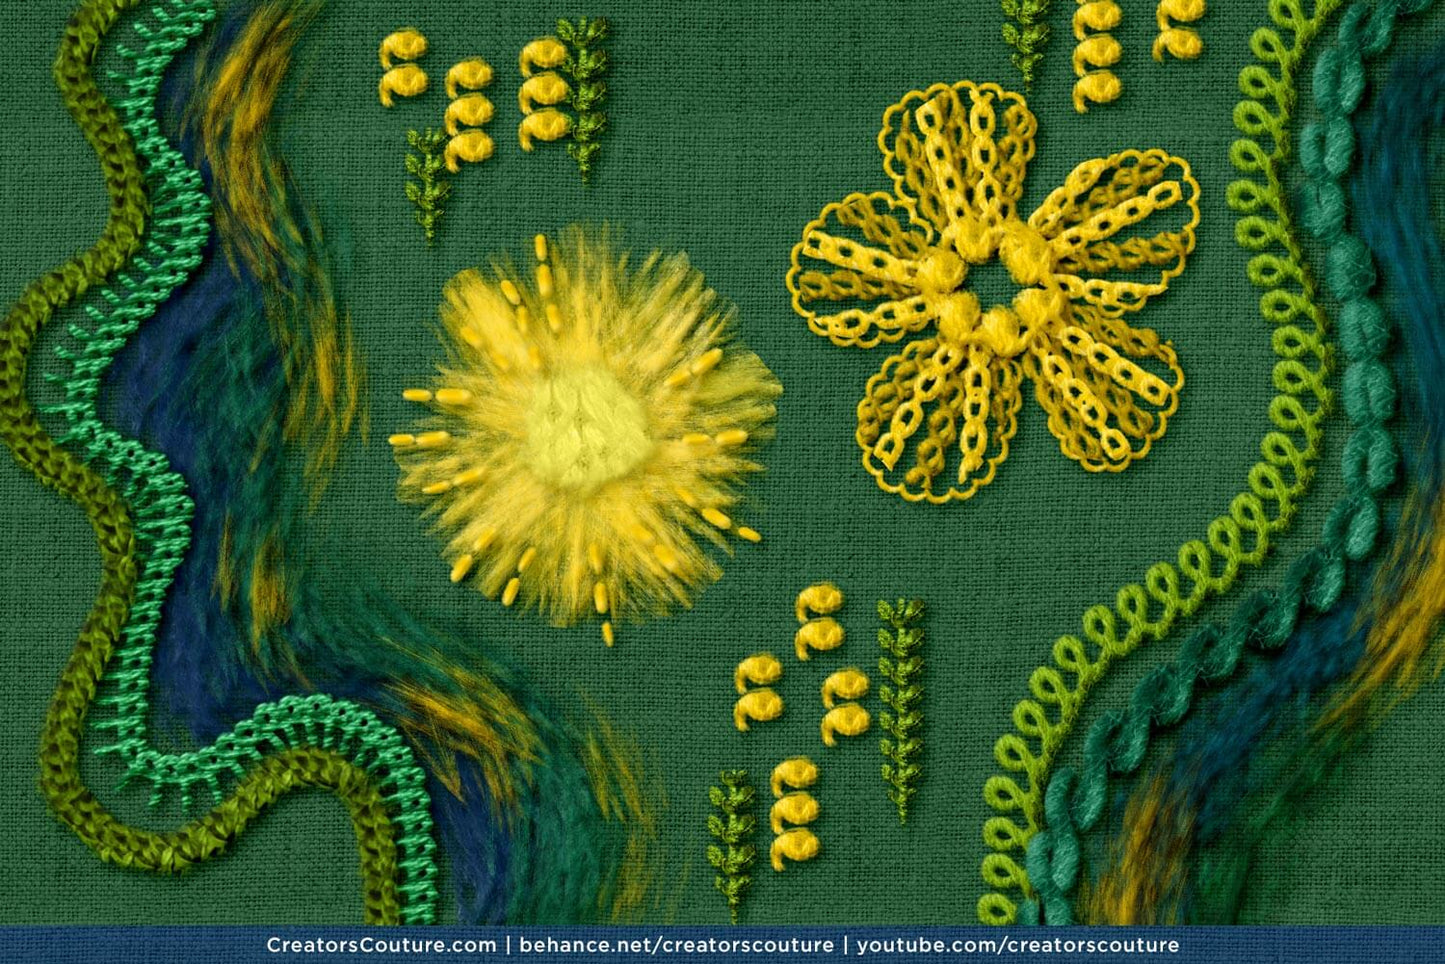 abstract floral illustration combining photoshop brush strokes that emulate stitches, embroidery and felt art